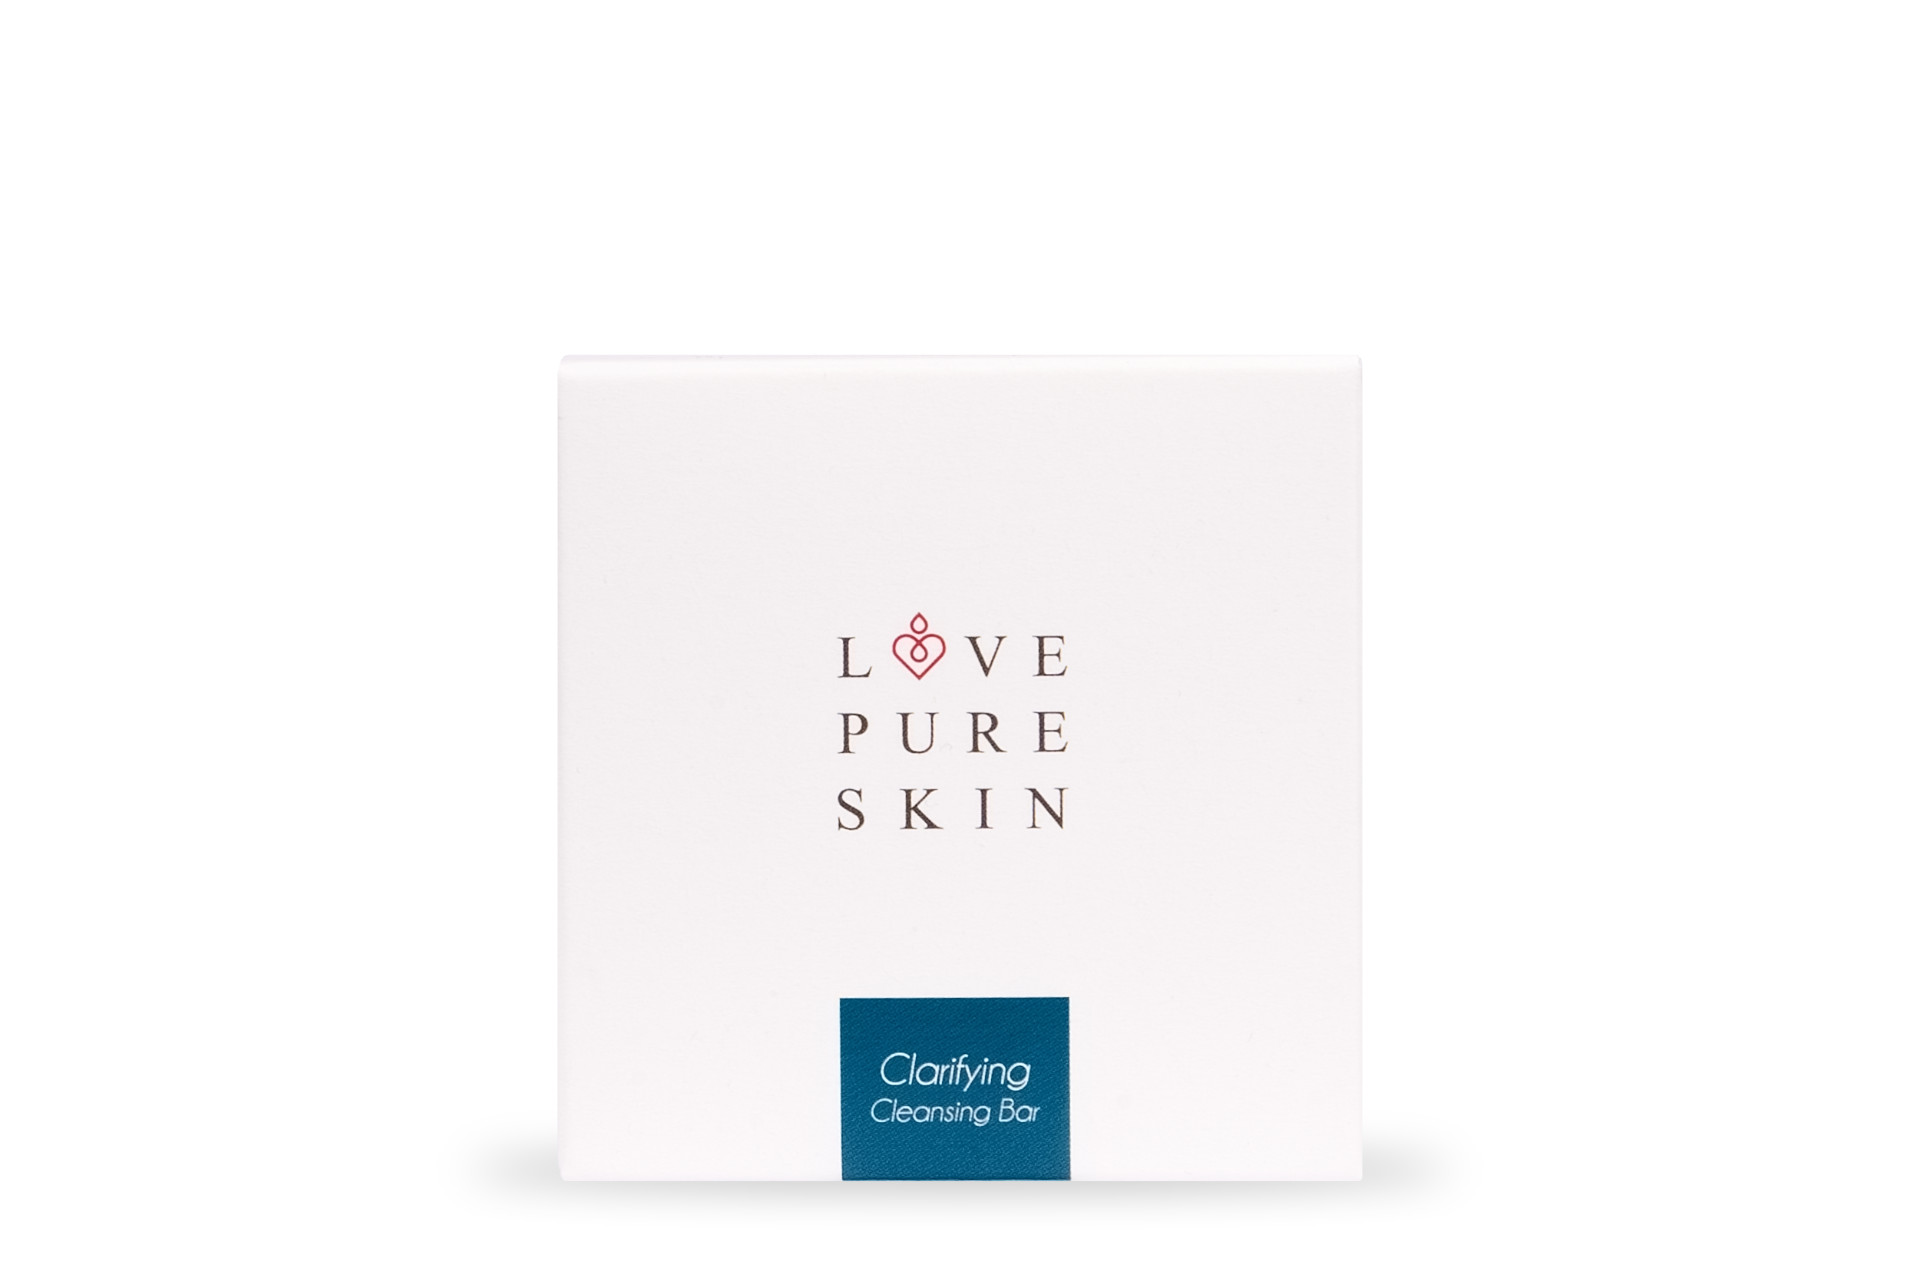 LOVE PURE SKIN Clarifying Cleansing Bar 